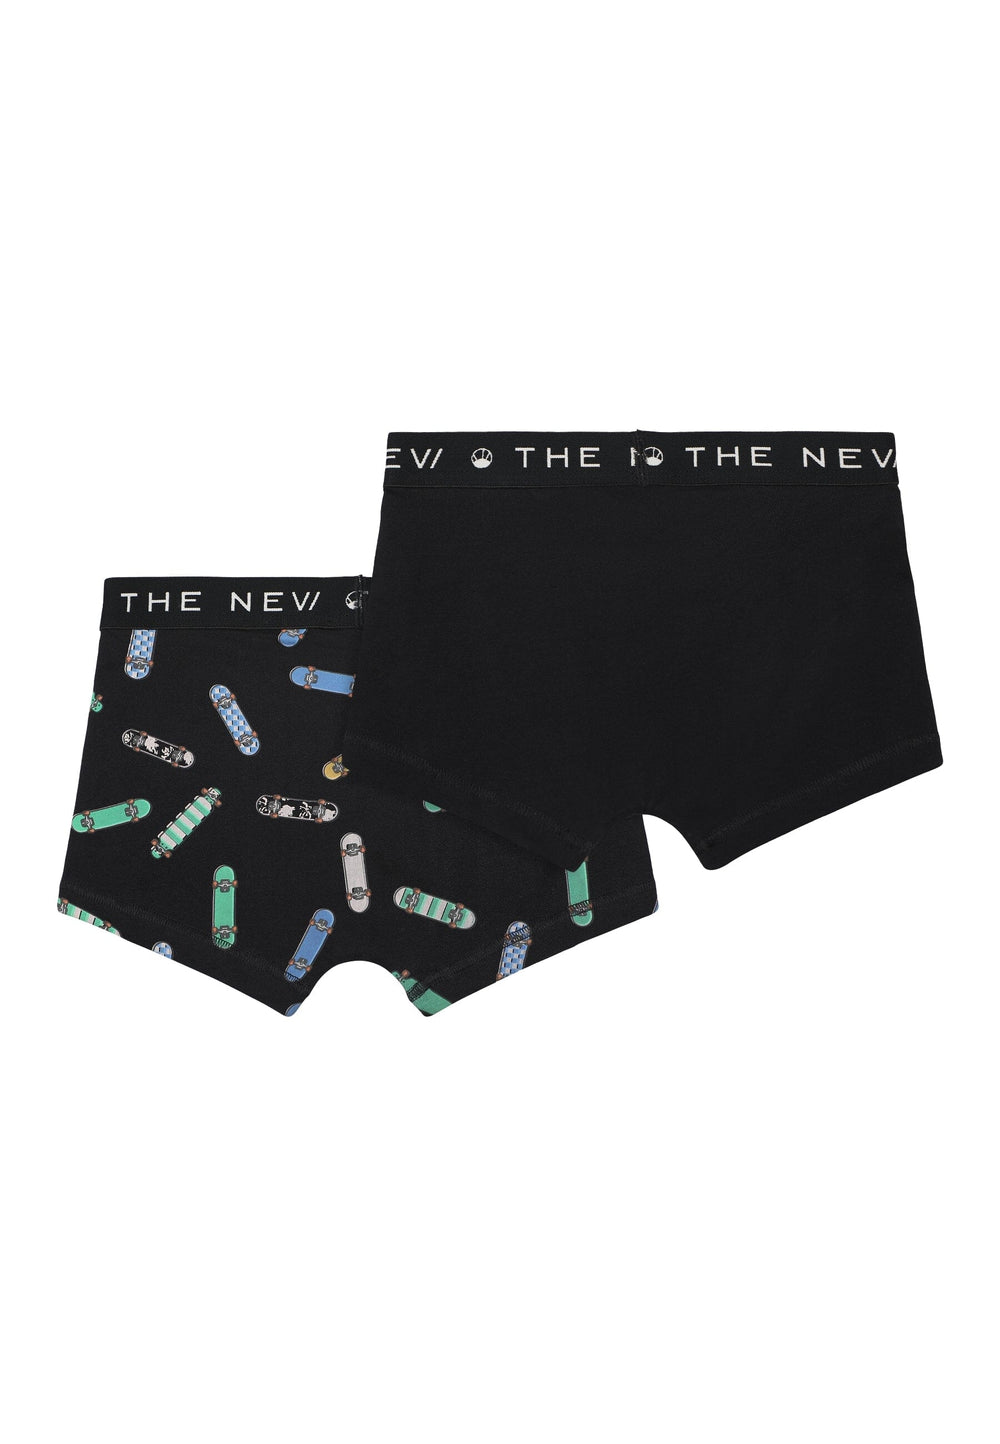 The New - The New Boxers 2-Pack - Black Beauty Underbukser 